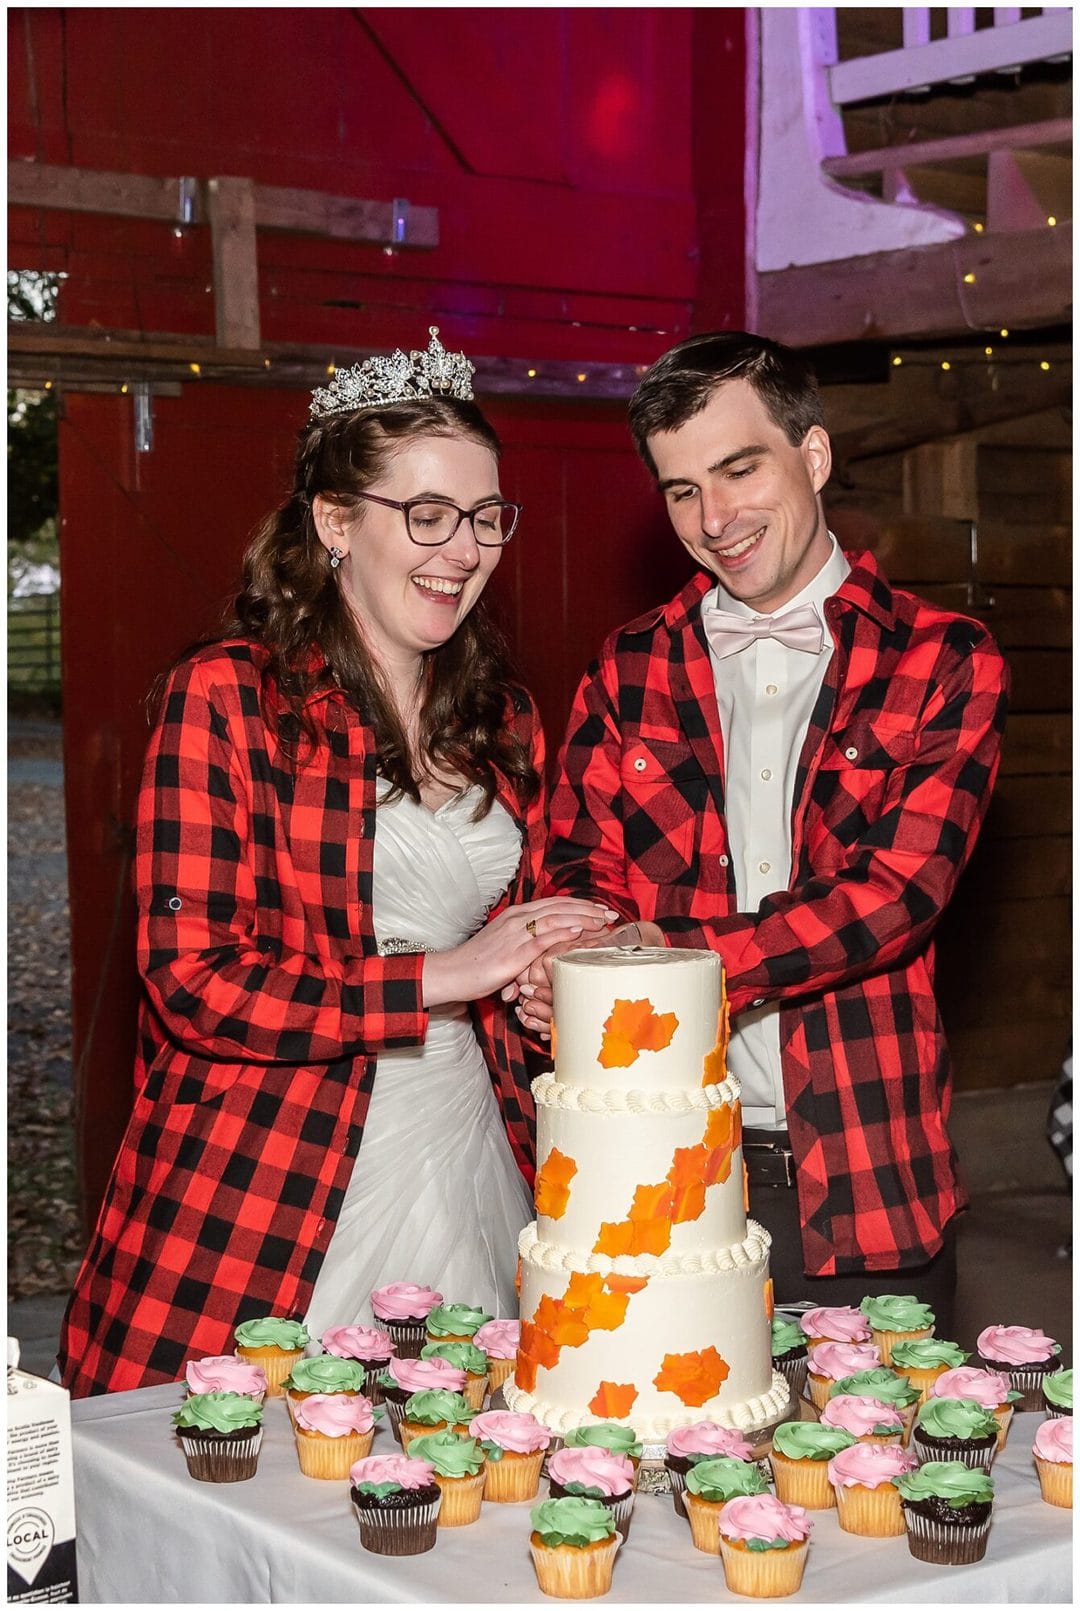 The bride and groom cut their cake together at their wedding reception in the Kinley Farm in Lunenburg, NS.